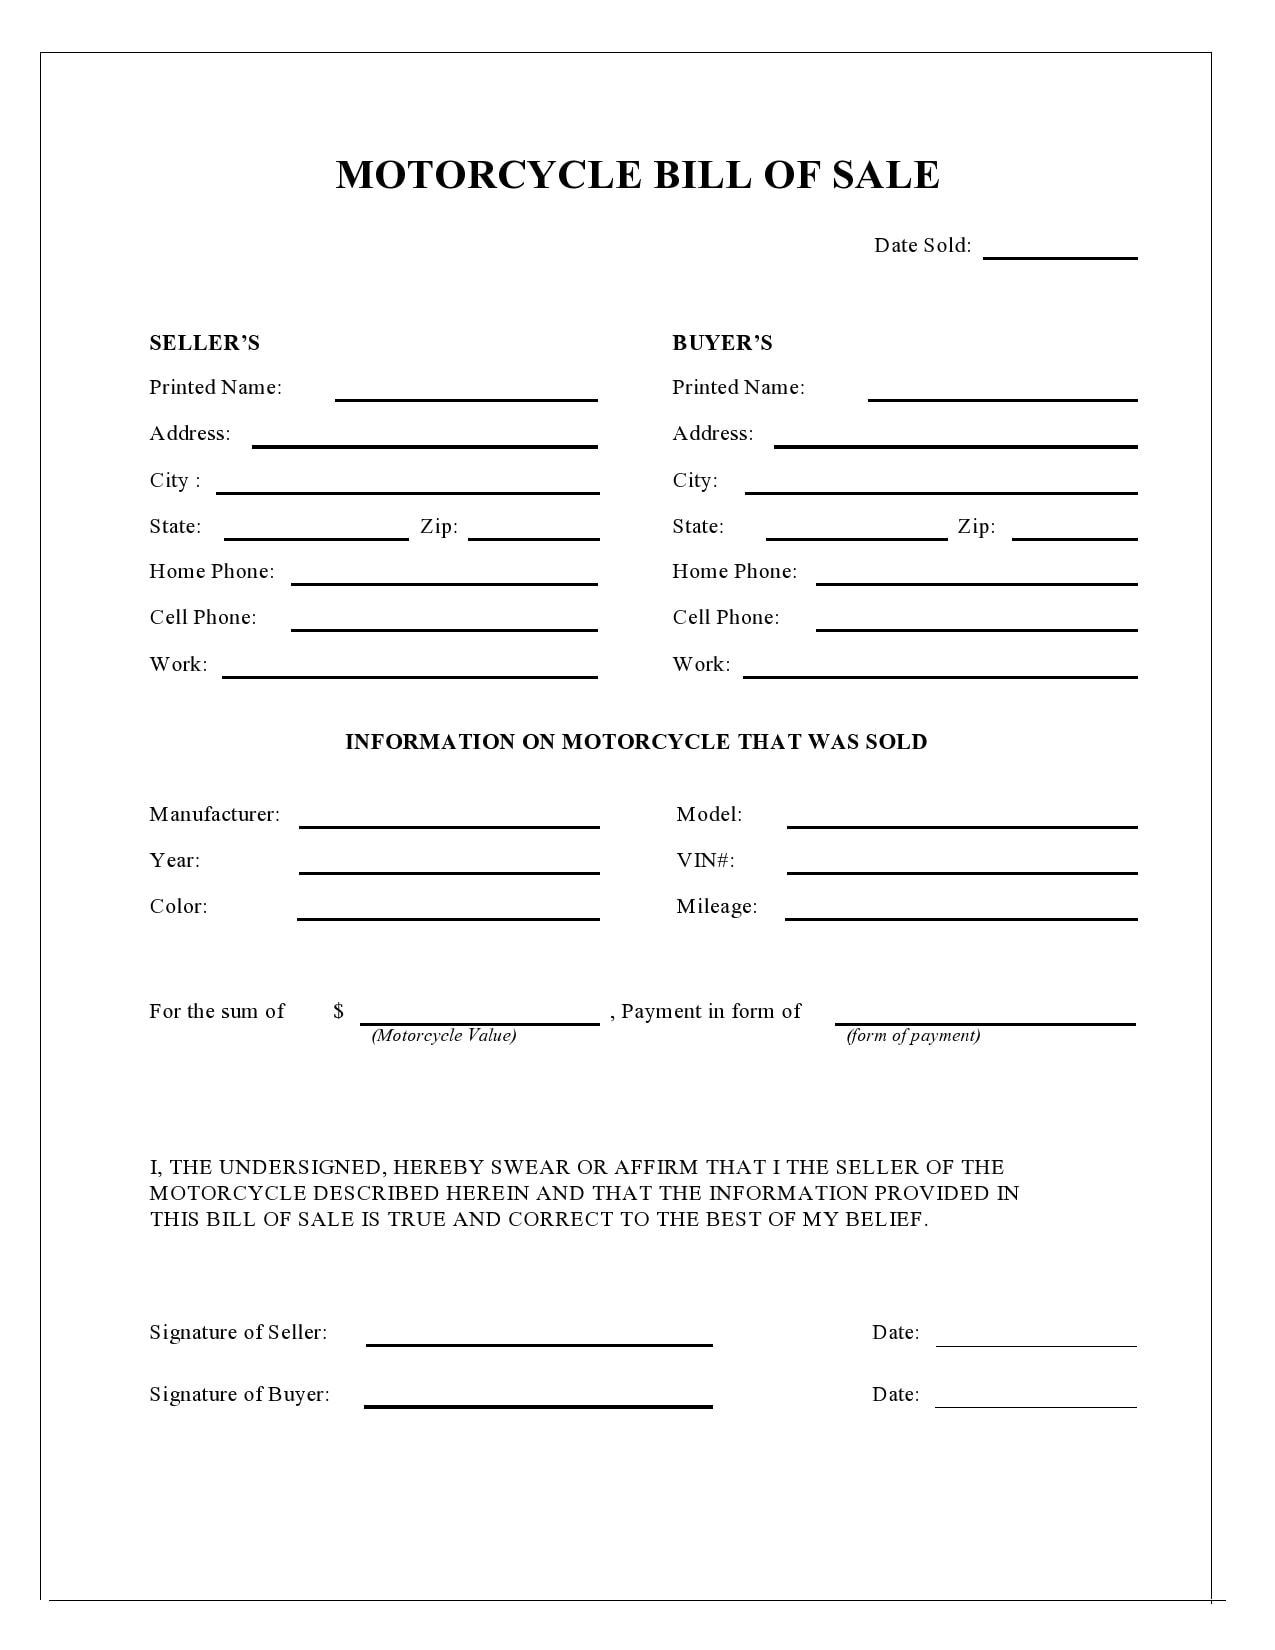 Free Motorcycle Bill Of Sale Form Printable Form, Templates and Letter